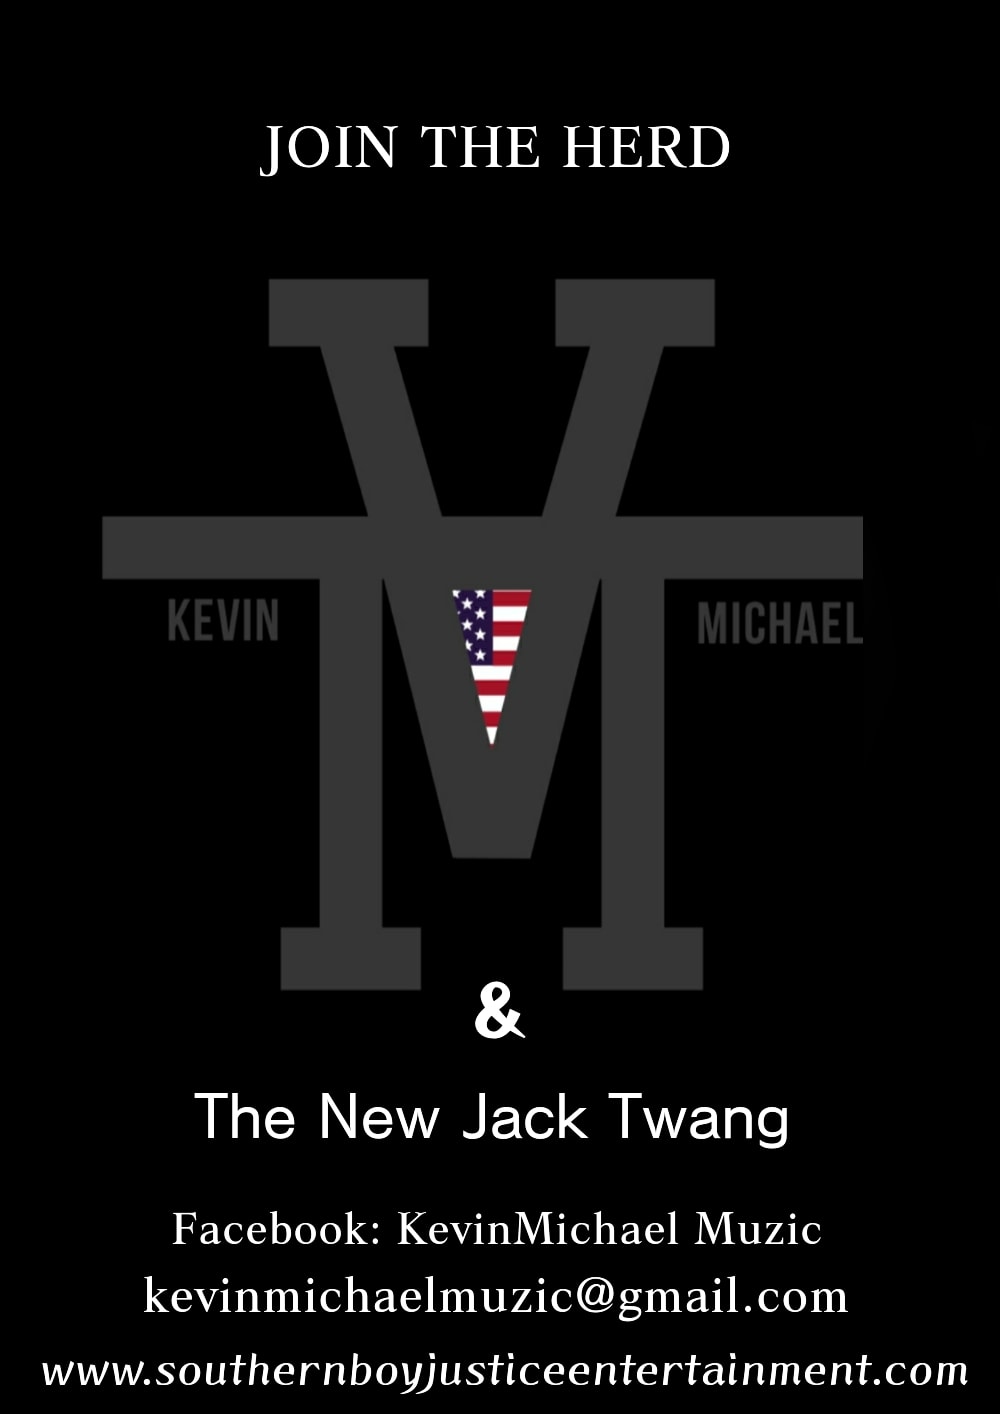 Kevin Michael and the New Jack Twang